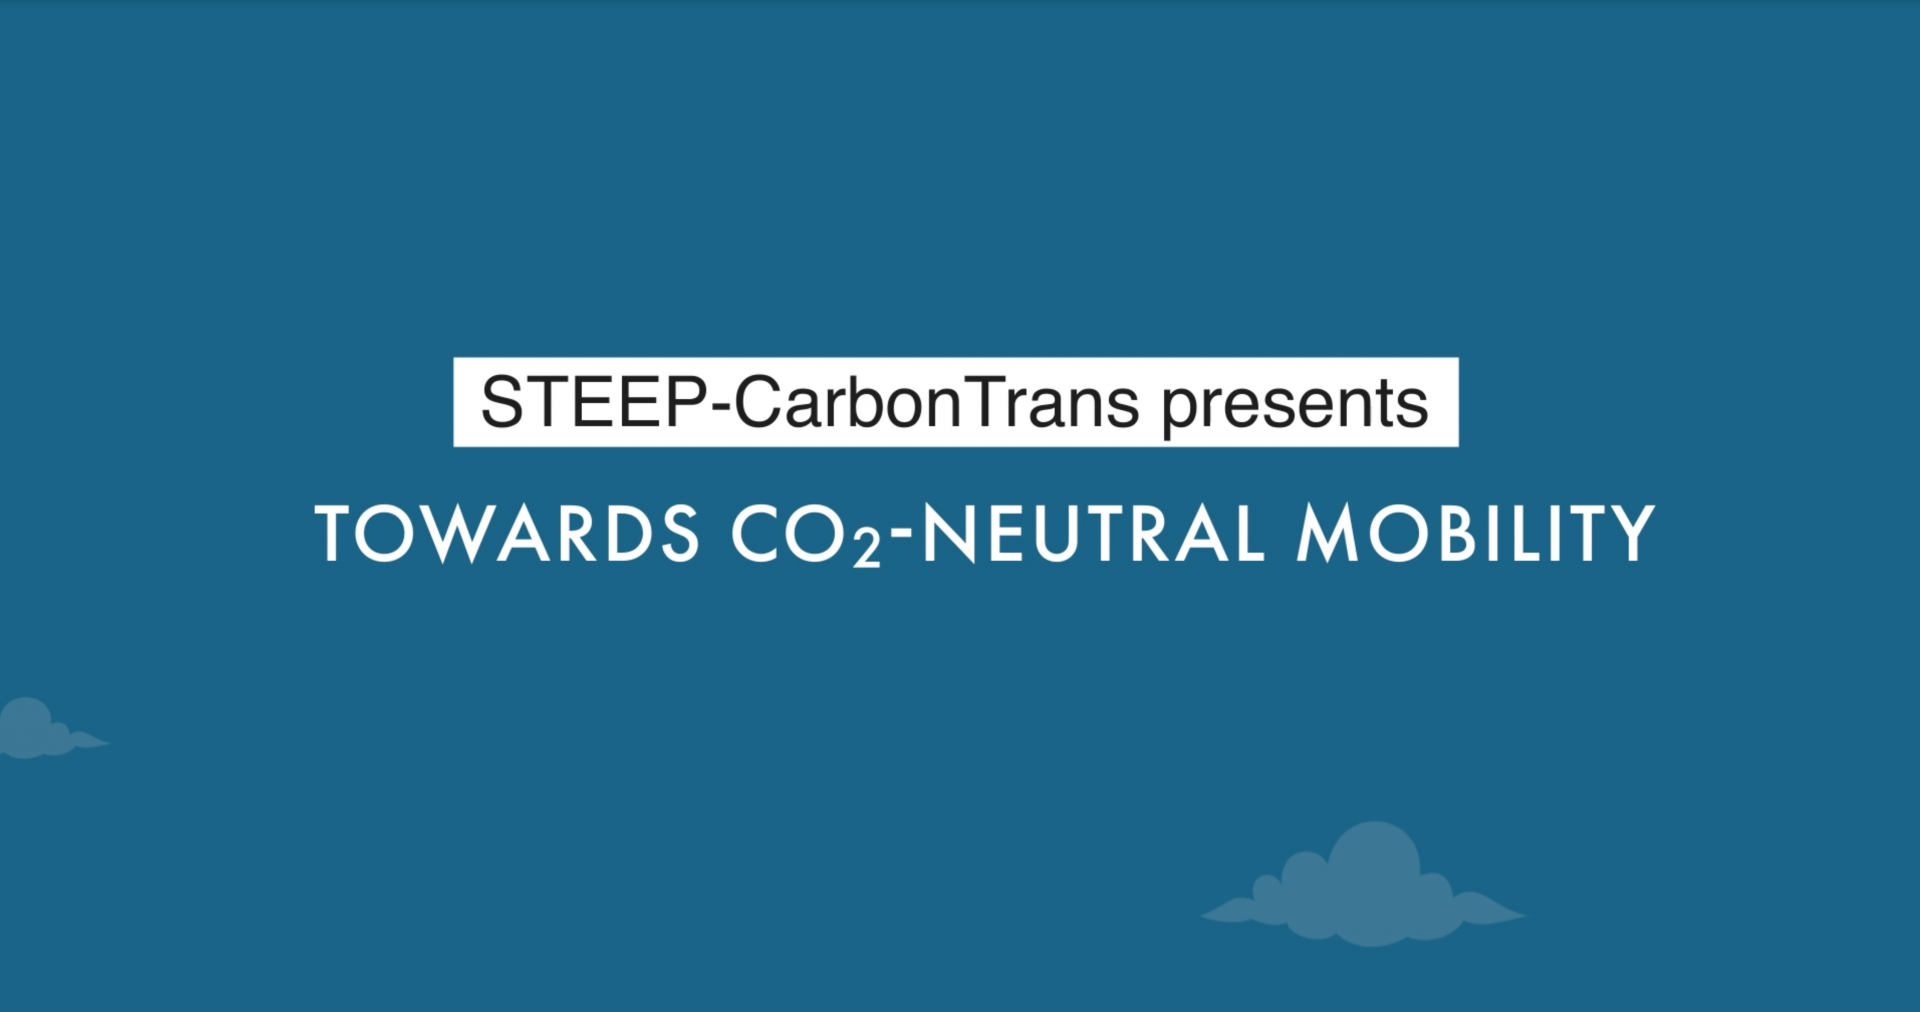 STEEP-CarbonTrans_Towards CO2 Neutral Mobility ENG